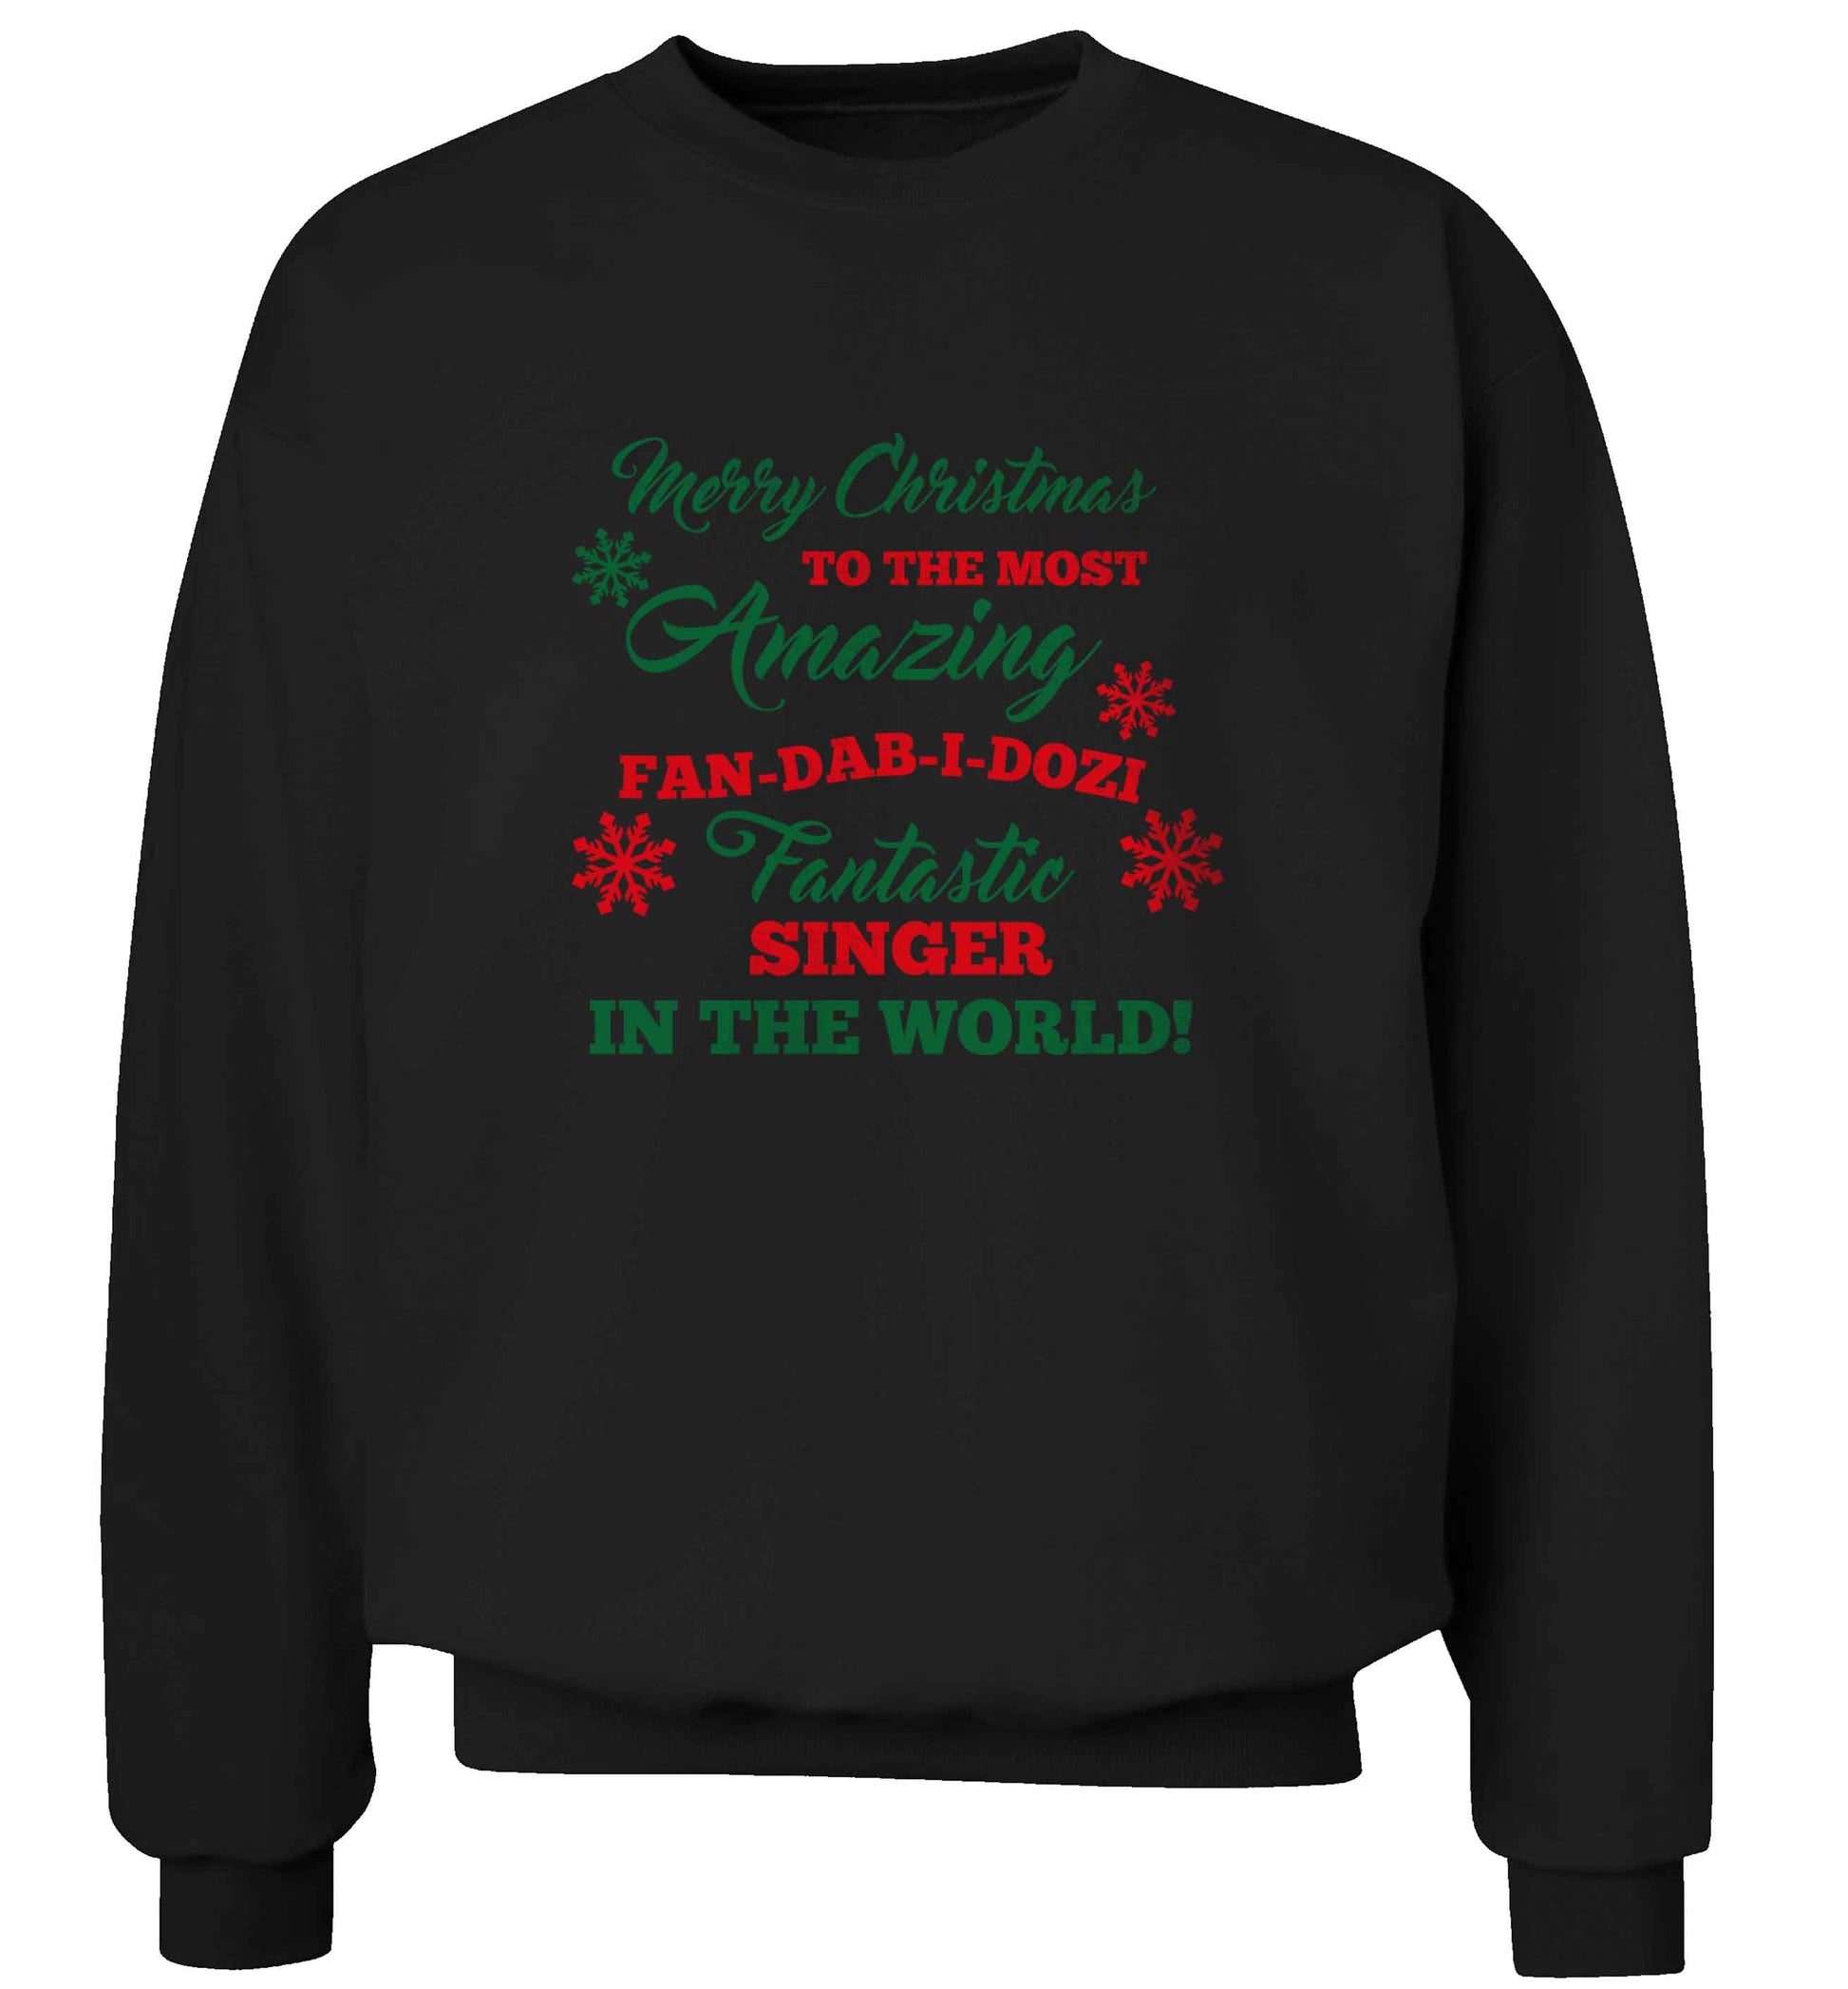 Merry Christmas to the most amazing singer in the world! adult's unisex black sweater 2XL